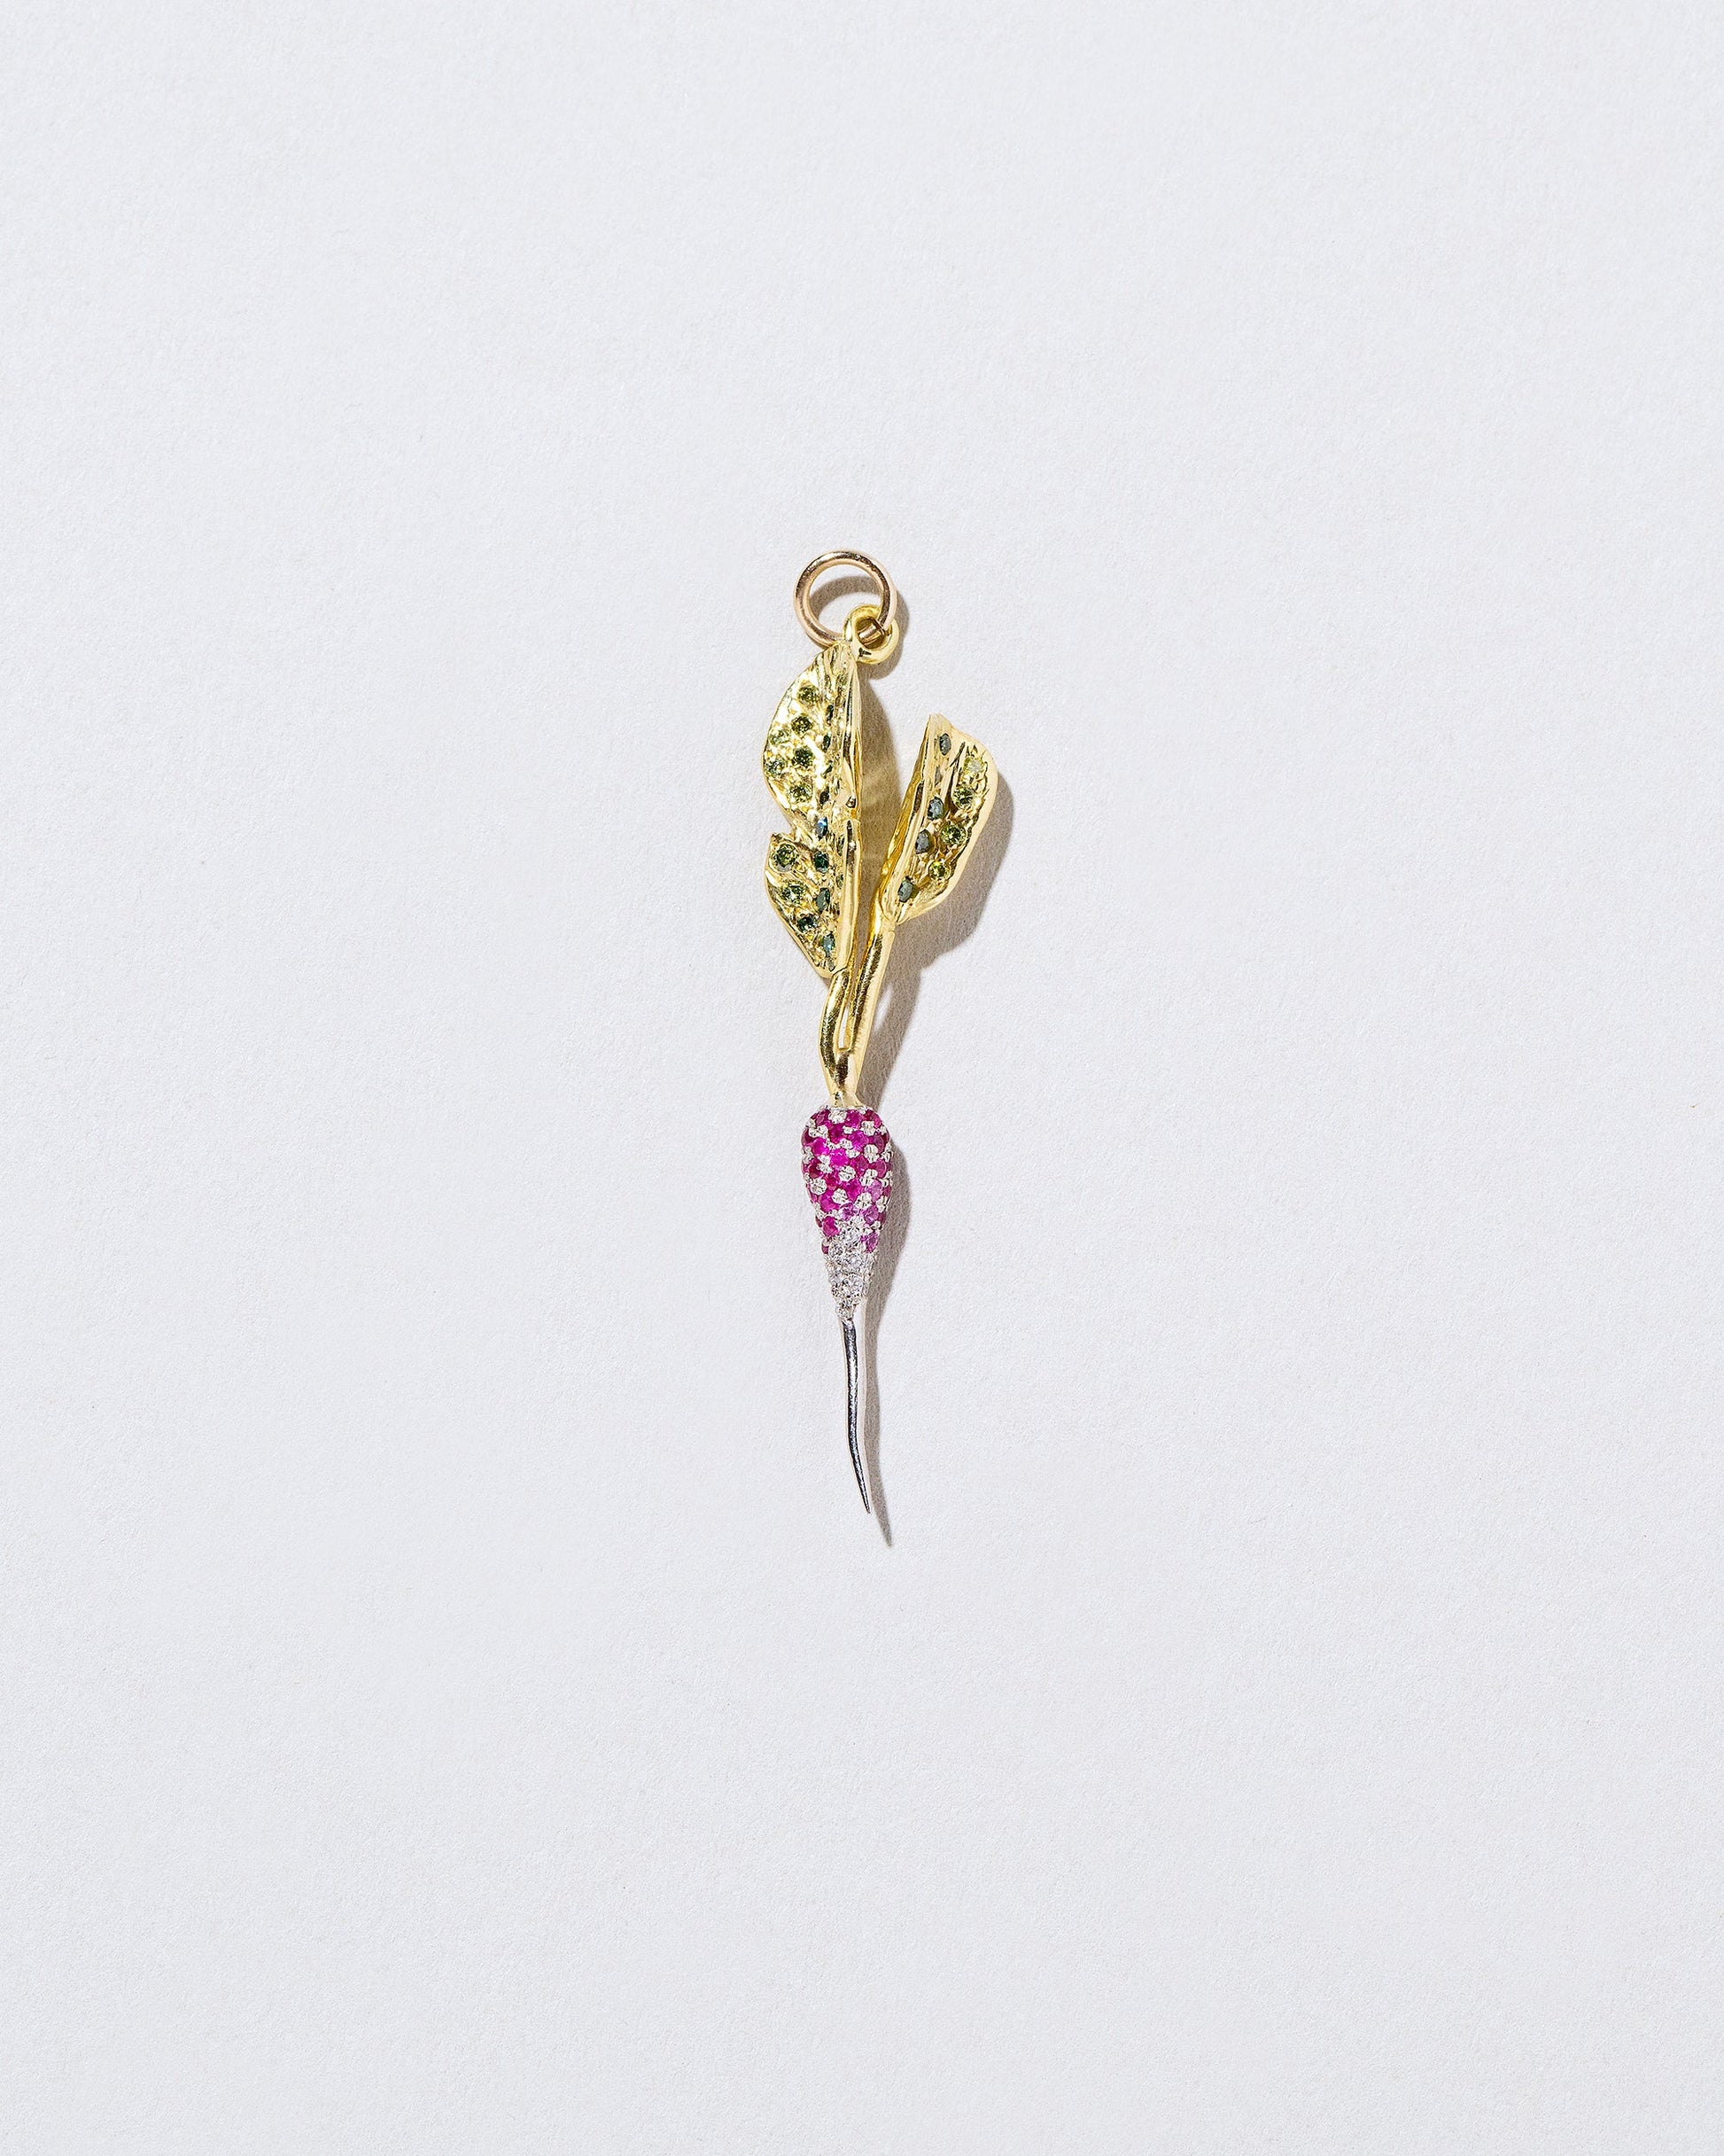  French Breakfast Radish Charm on light color background.